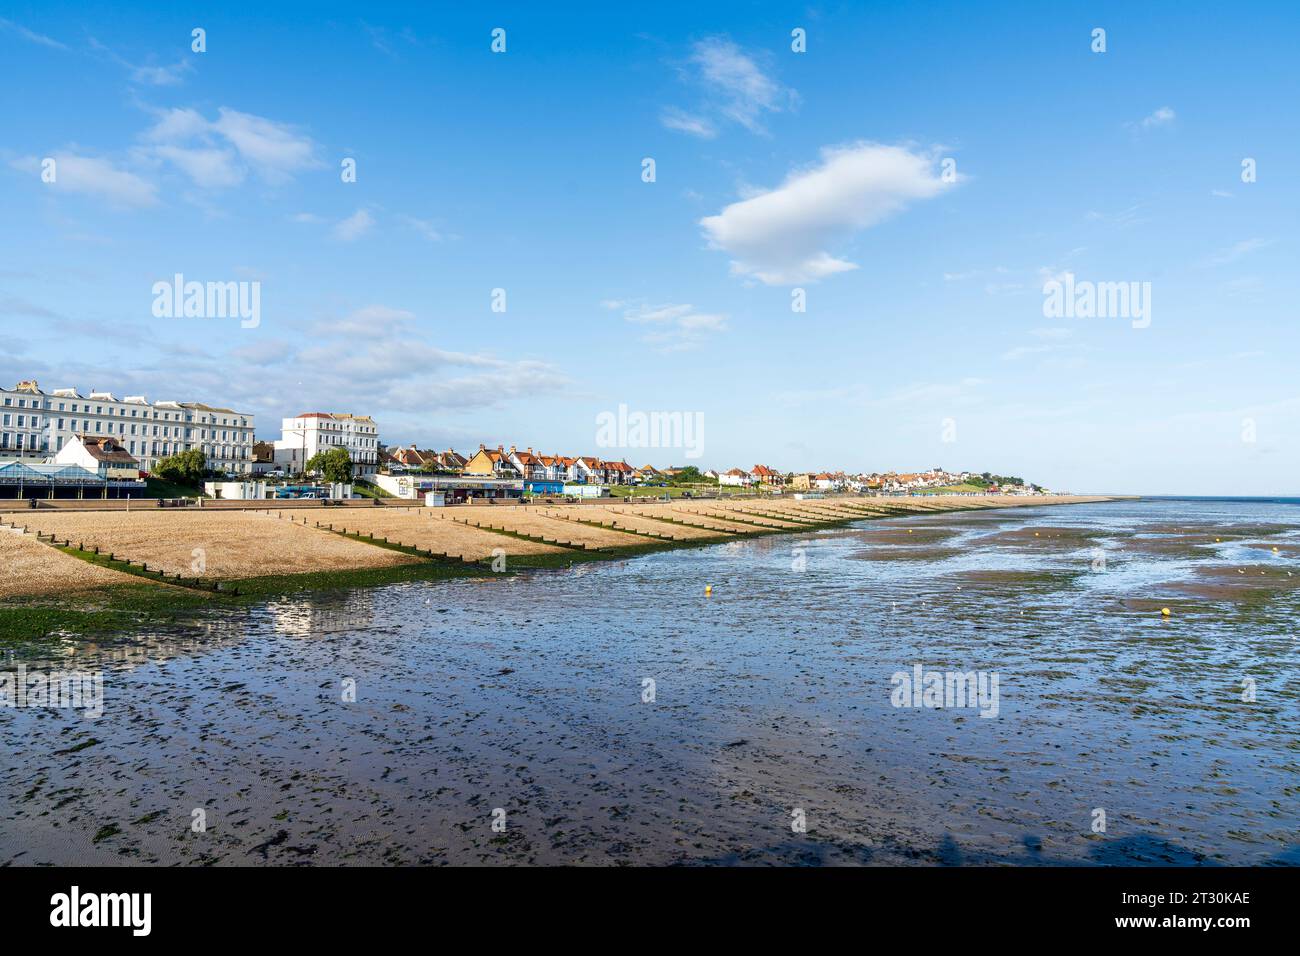 Early summer sunny morning view along the beach and groynes, breakwaters, on the empty beach at Herne Bay in kent against a clear blue sky. Stock Photo